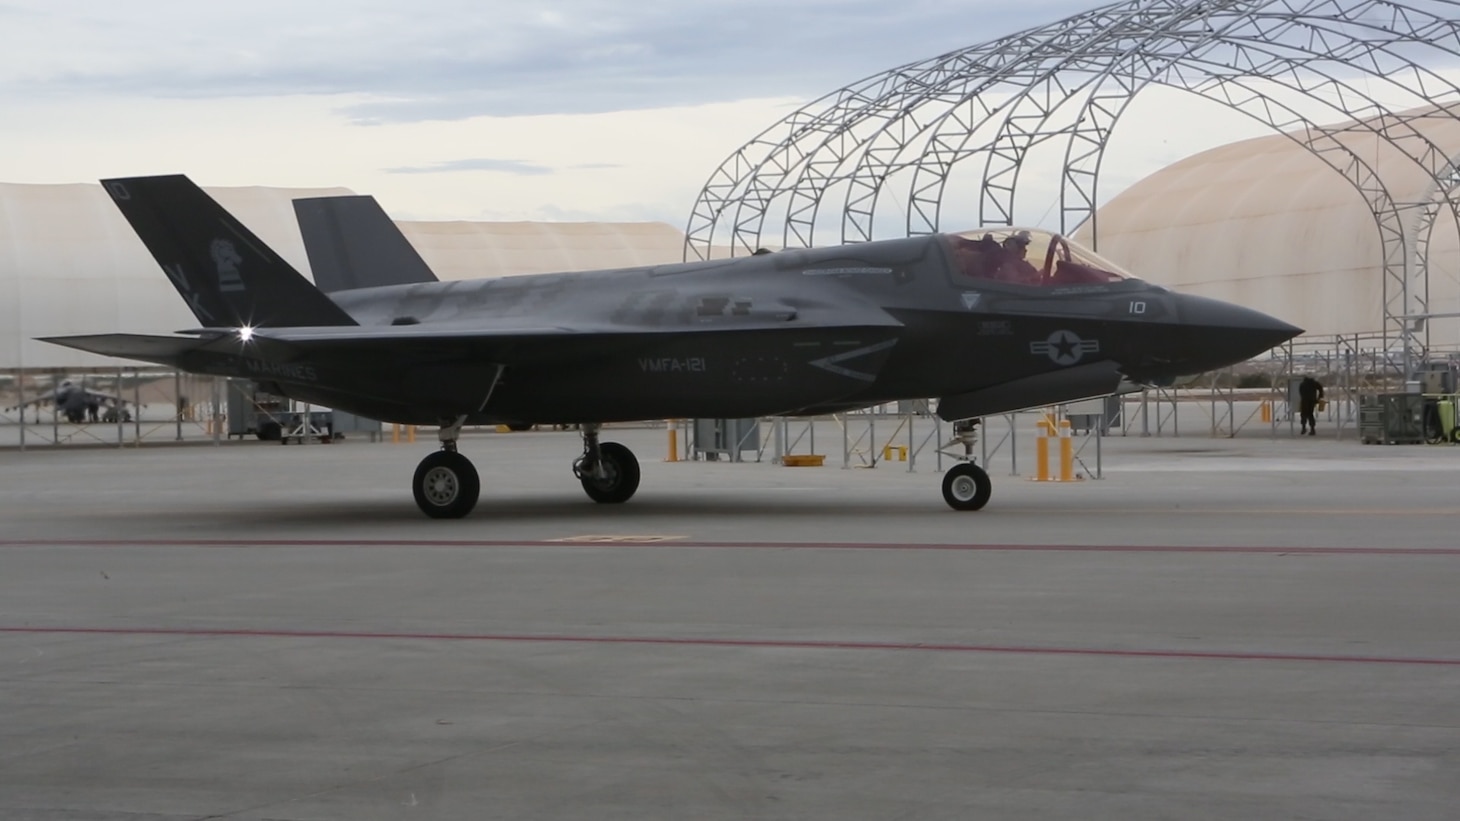 An F-35B lightning II with Marine Fighter Attack Squadron (VMFA) 121 prepares to take off aboard Marine Corps Air Station Yuma, Ariz., Jan. 9, 2017, as it transits the Pacific en route to Marine Corps Air Station Iwakuni, Japan. VMFA-121 is the first operational F-35B squadron assigned to the Fleet Marine Force, with its relocation to 1st Marine Aircraft Wing at Iwakuni.  The F-35B was developed to replace the Marine Corps’ F/A-18 Hornet, AV-8B Harrier and EA- 6B Prowler. The Short Take-off Vertical Landing (STOVL) aircraft is a true force multiplier. The unique combination of stealth, cutting-edge radar and sensor technology, and electronic warfare systems bring all of the access and lethality capabilities of a fifth-generation fighter, a modern bomber, and an adverse-weather, all-threat environment air support platform.